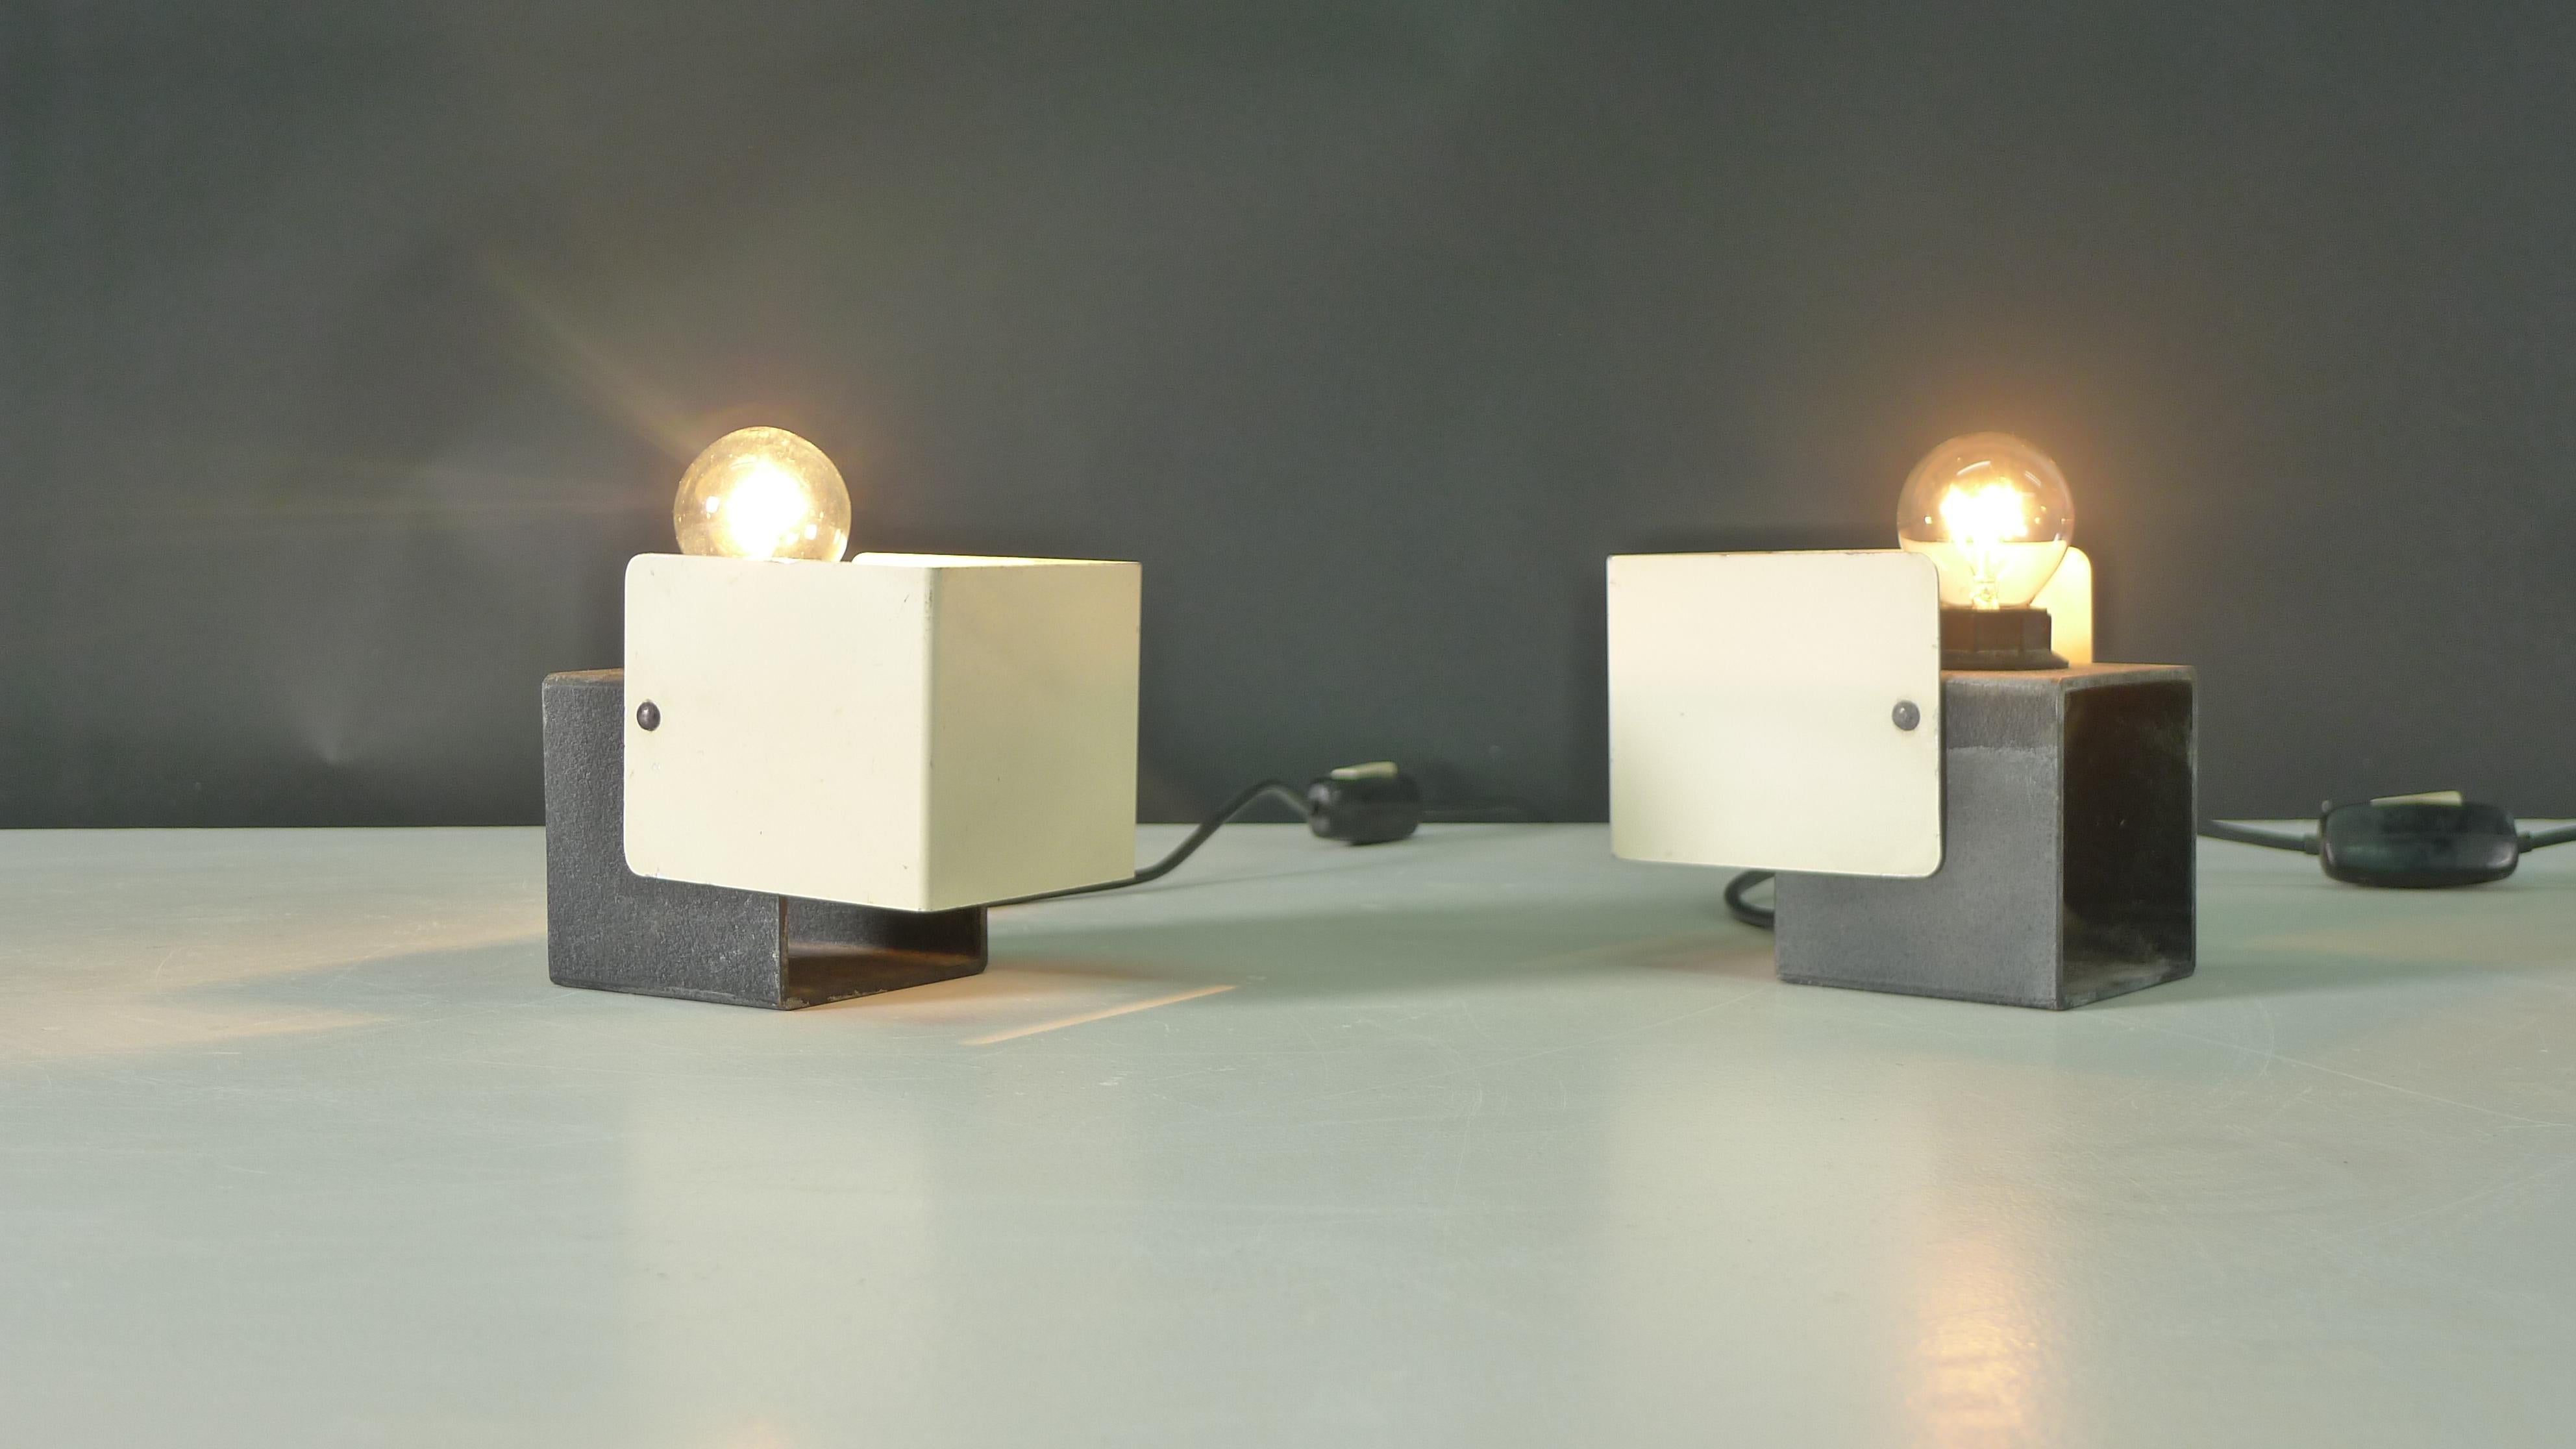 Enamel Gino Sarfatti for Arteluce, Rare Pair of Table/Desk Lamps, Circa 1960, Labelled For Sale